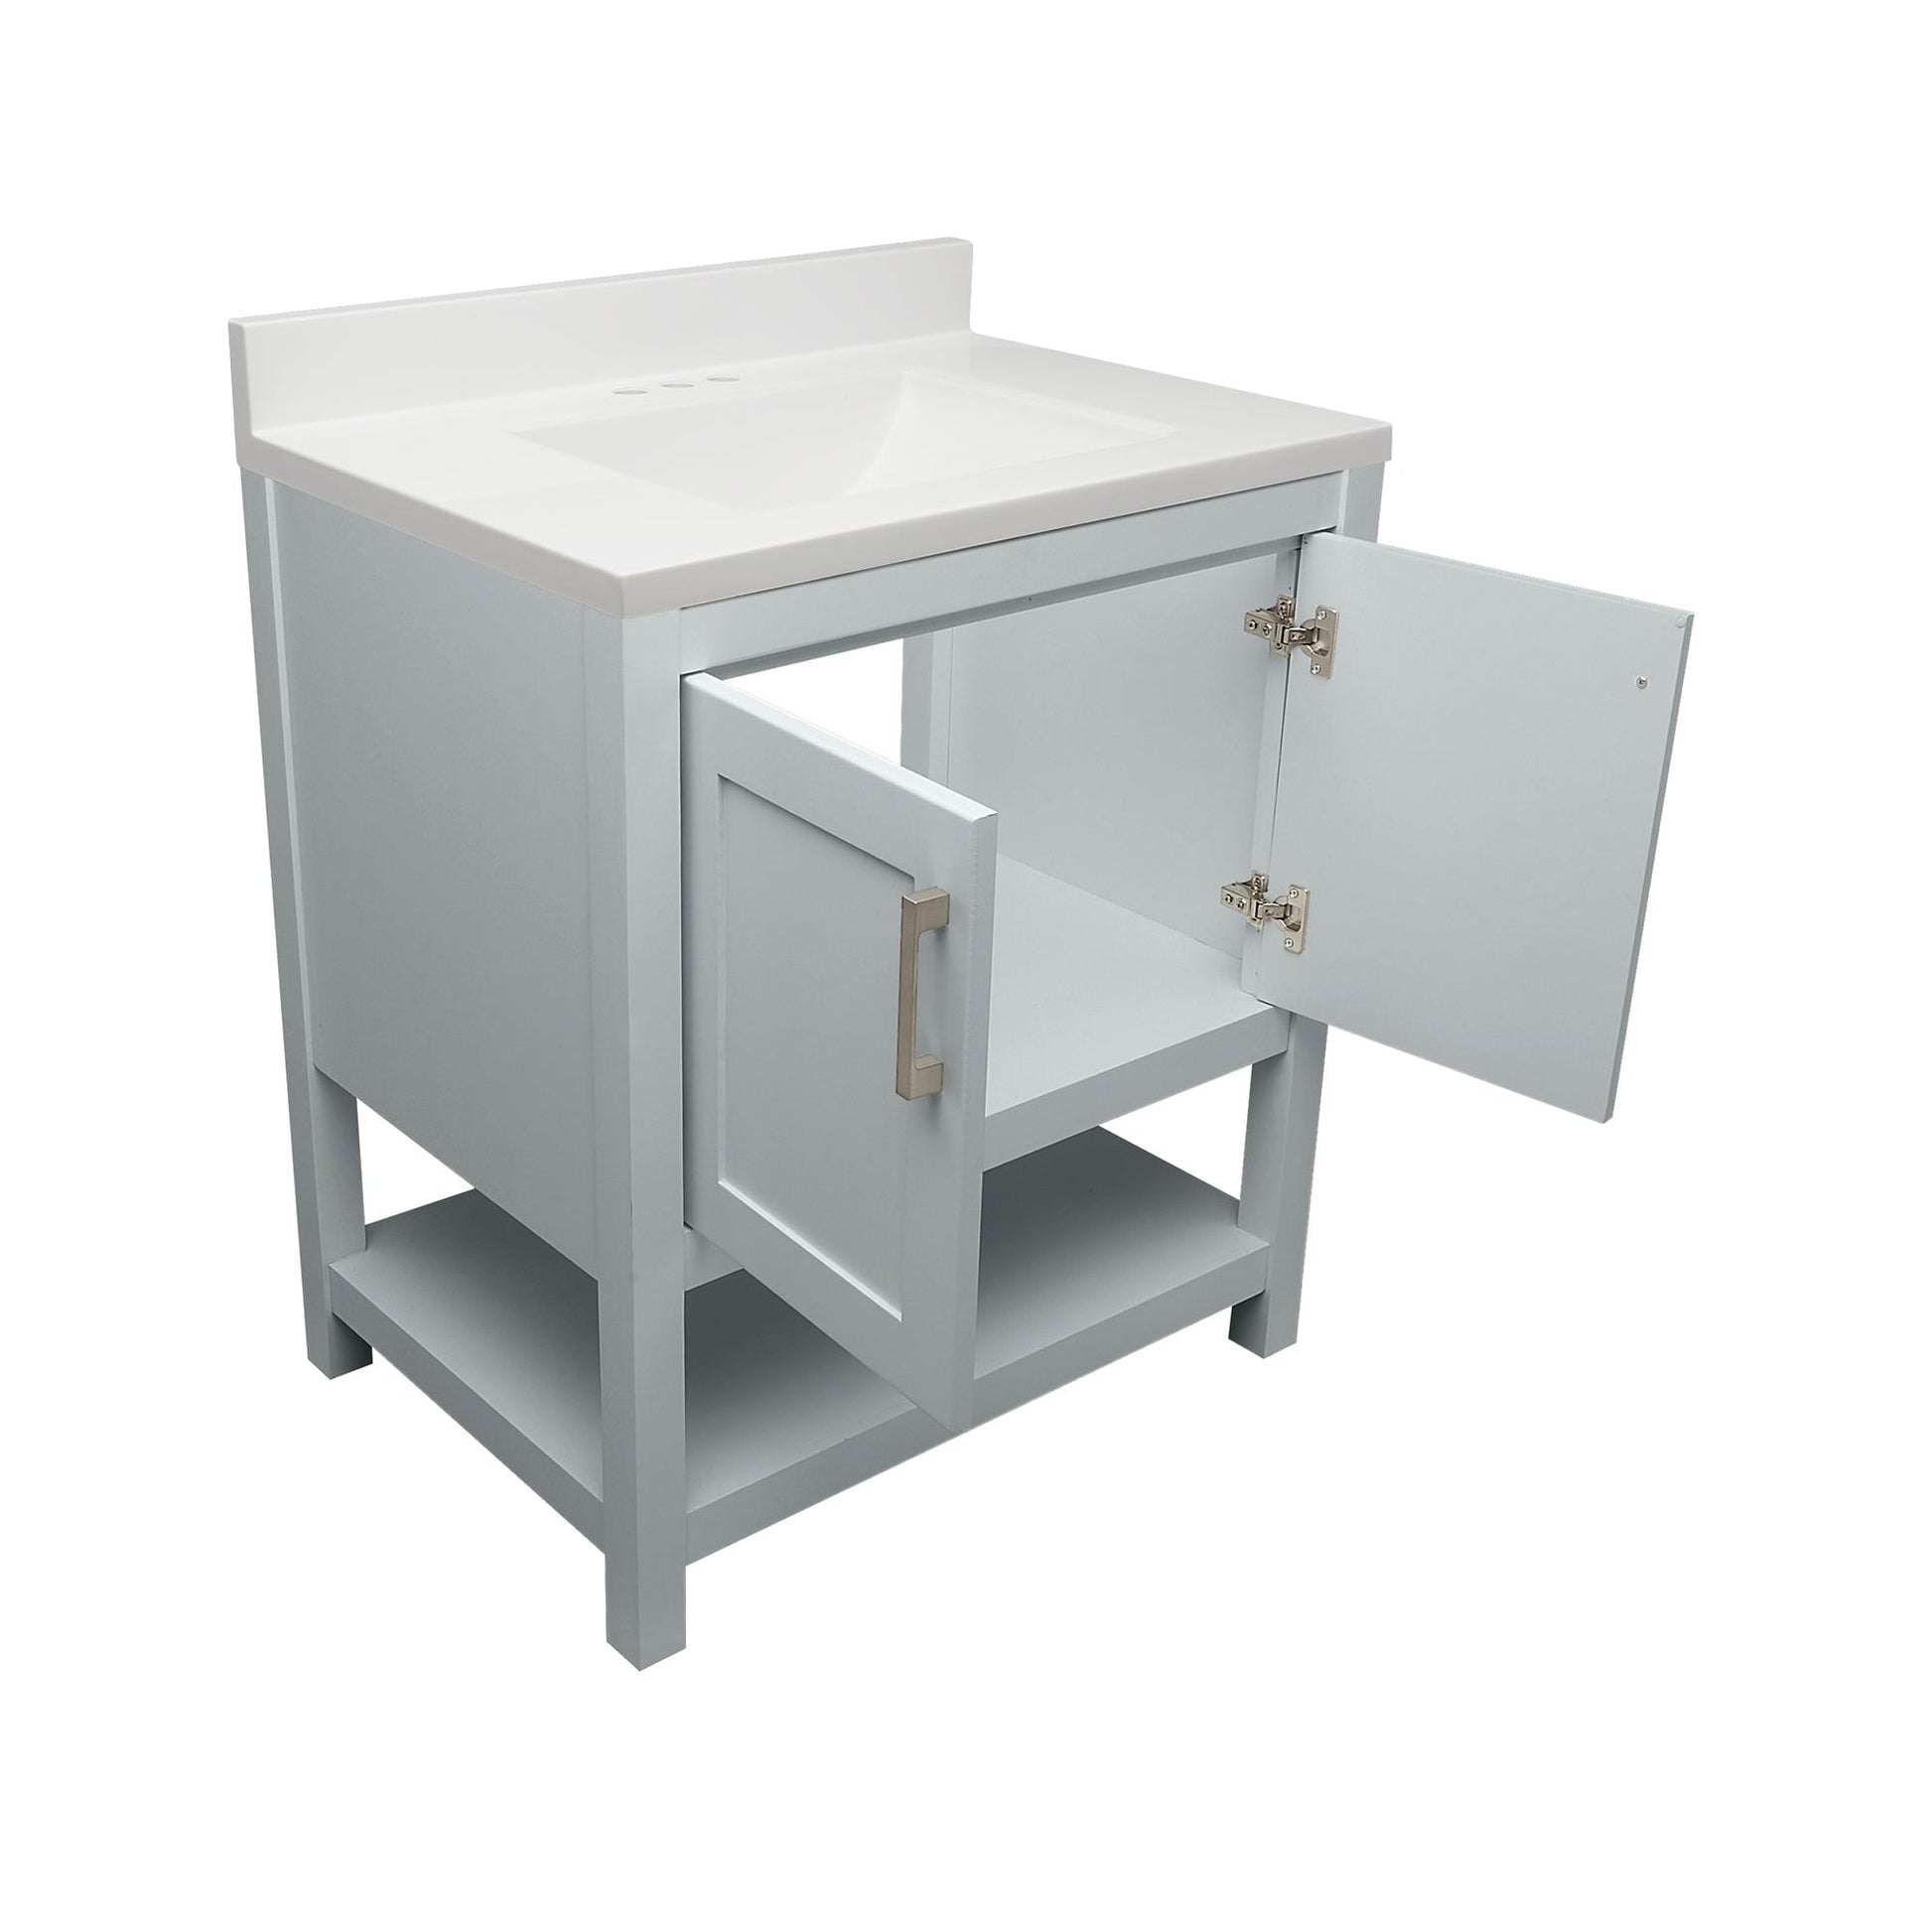 Ella's Bubbles Taos 31" Gray Bathroom Vanity With White Cultured Marble Top With Backsplash and Sink